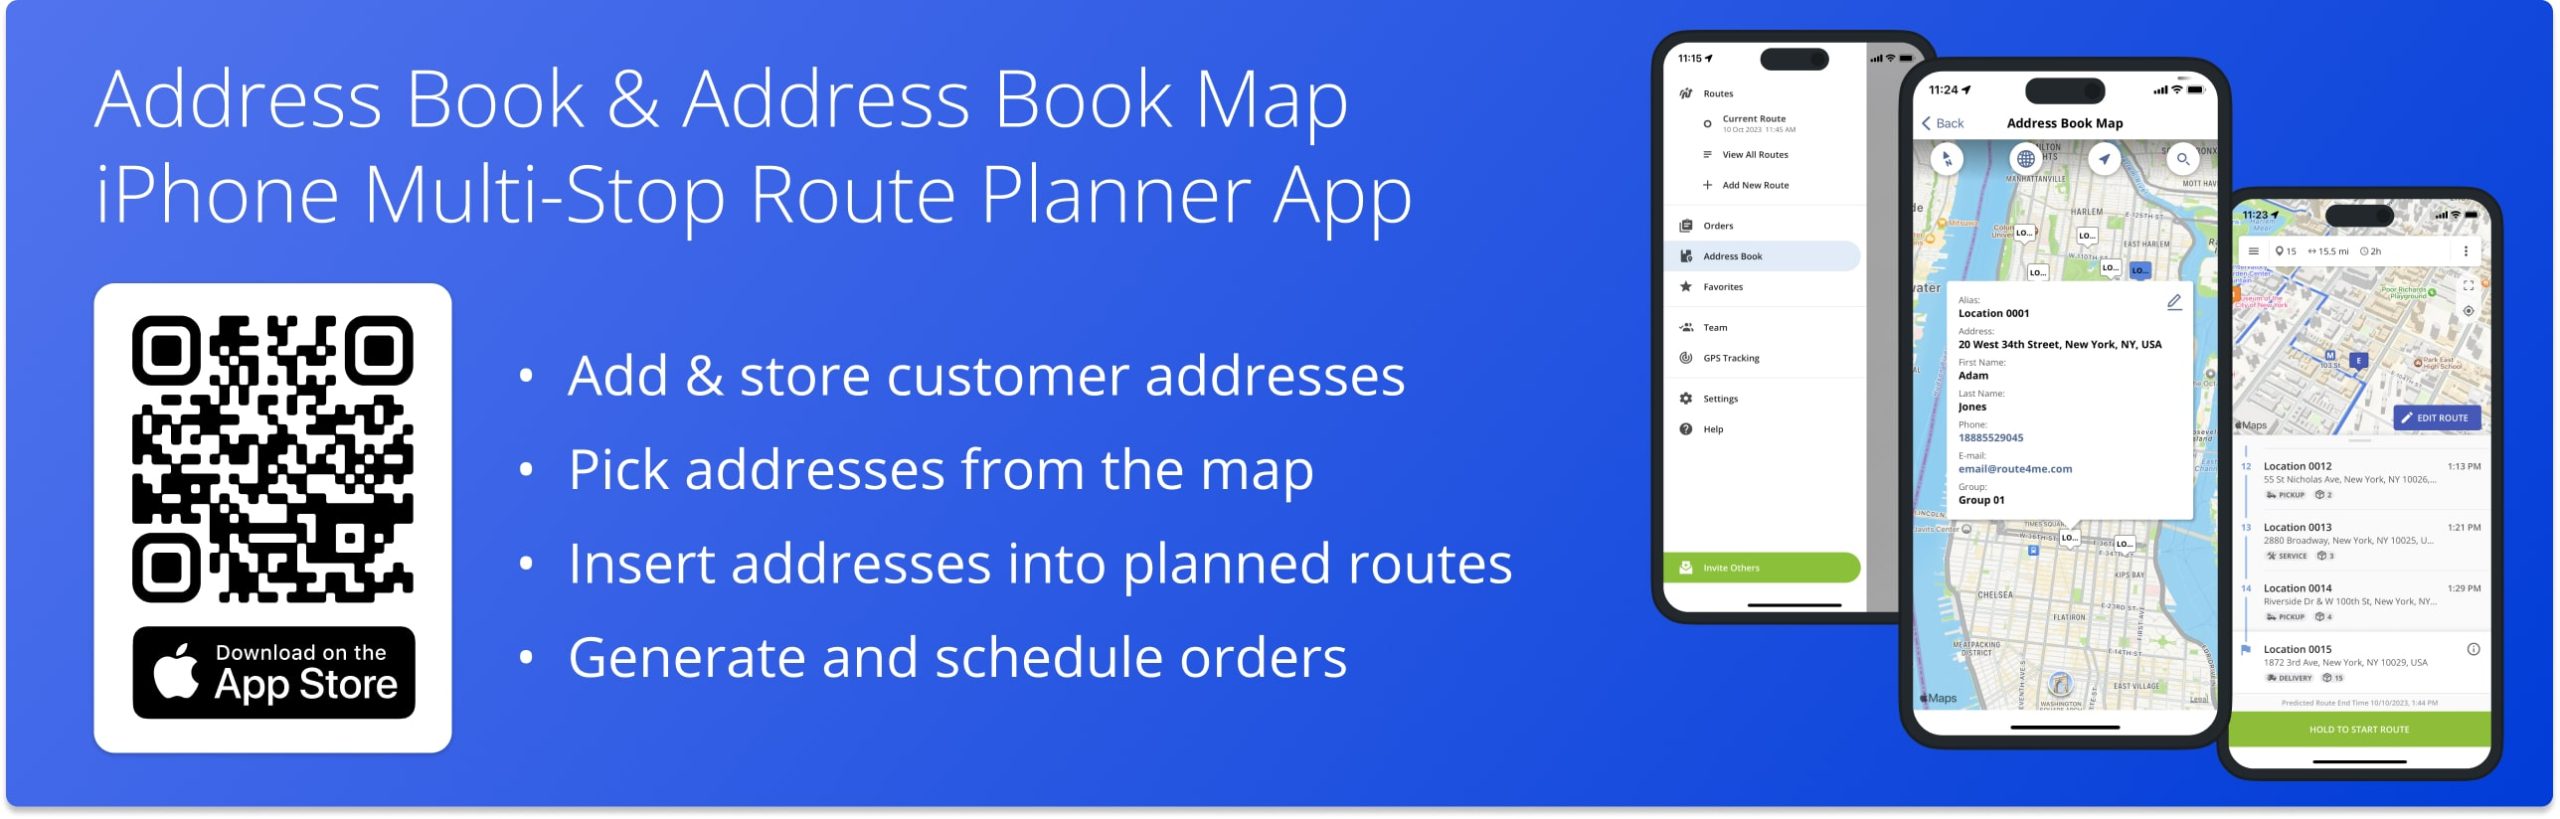 Synced Address Book on Route4Me's iPhone Route Planner app for storing, managing, adding, and inserting addresses into planned routes.